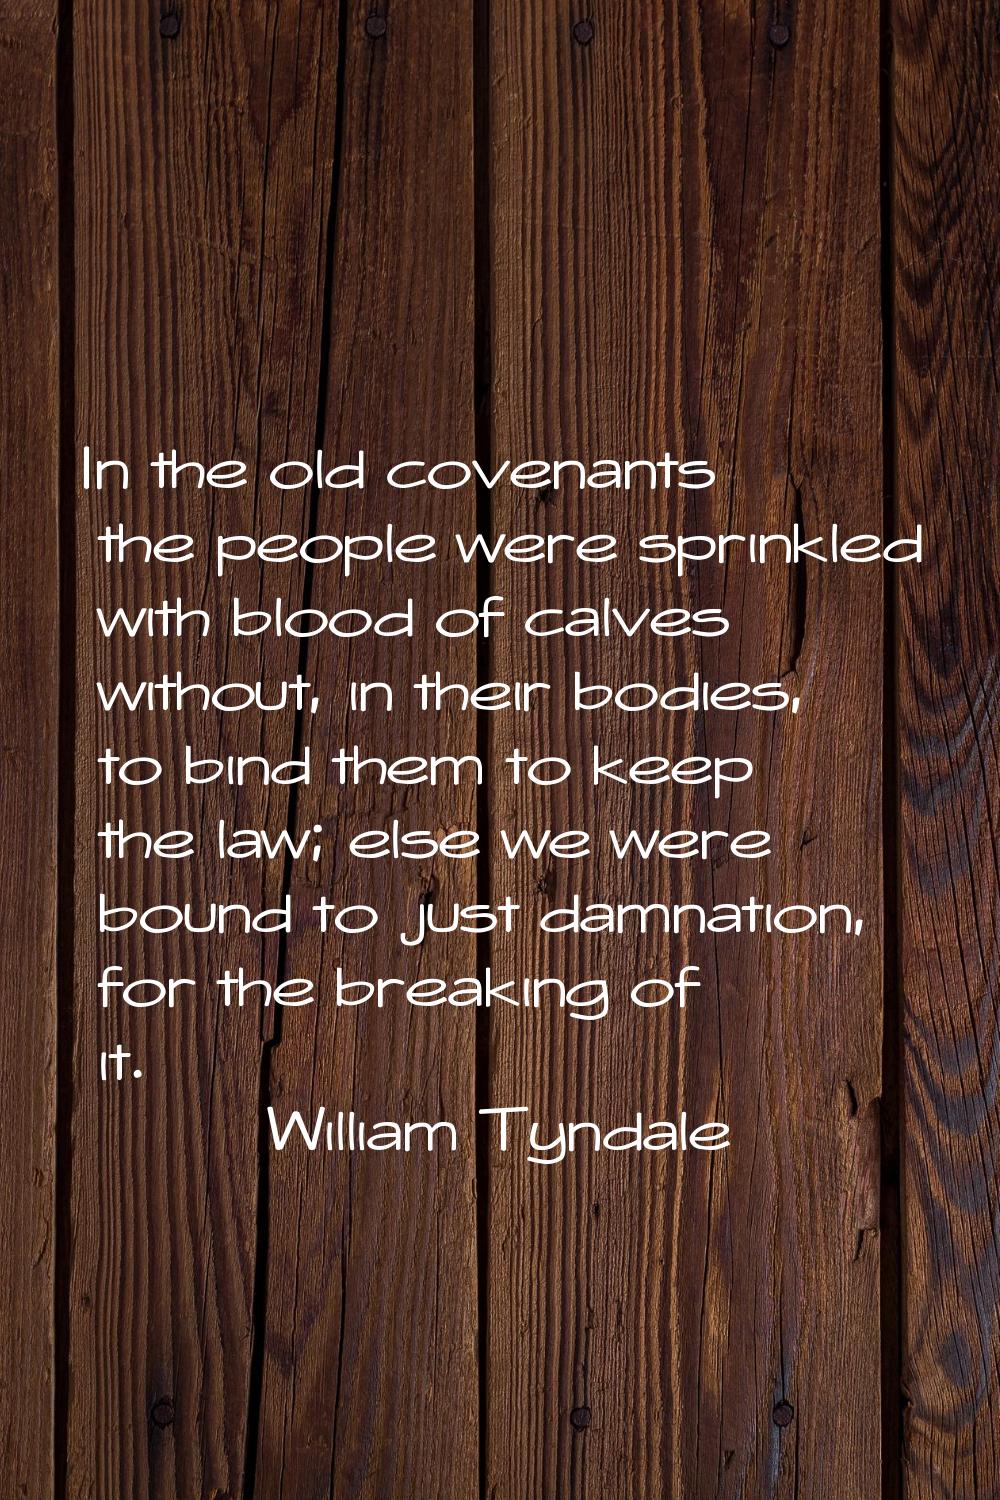 In the old covenants the people were sprinkled with blood of calves without, in their bodies, to bi